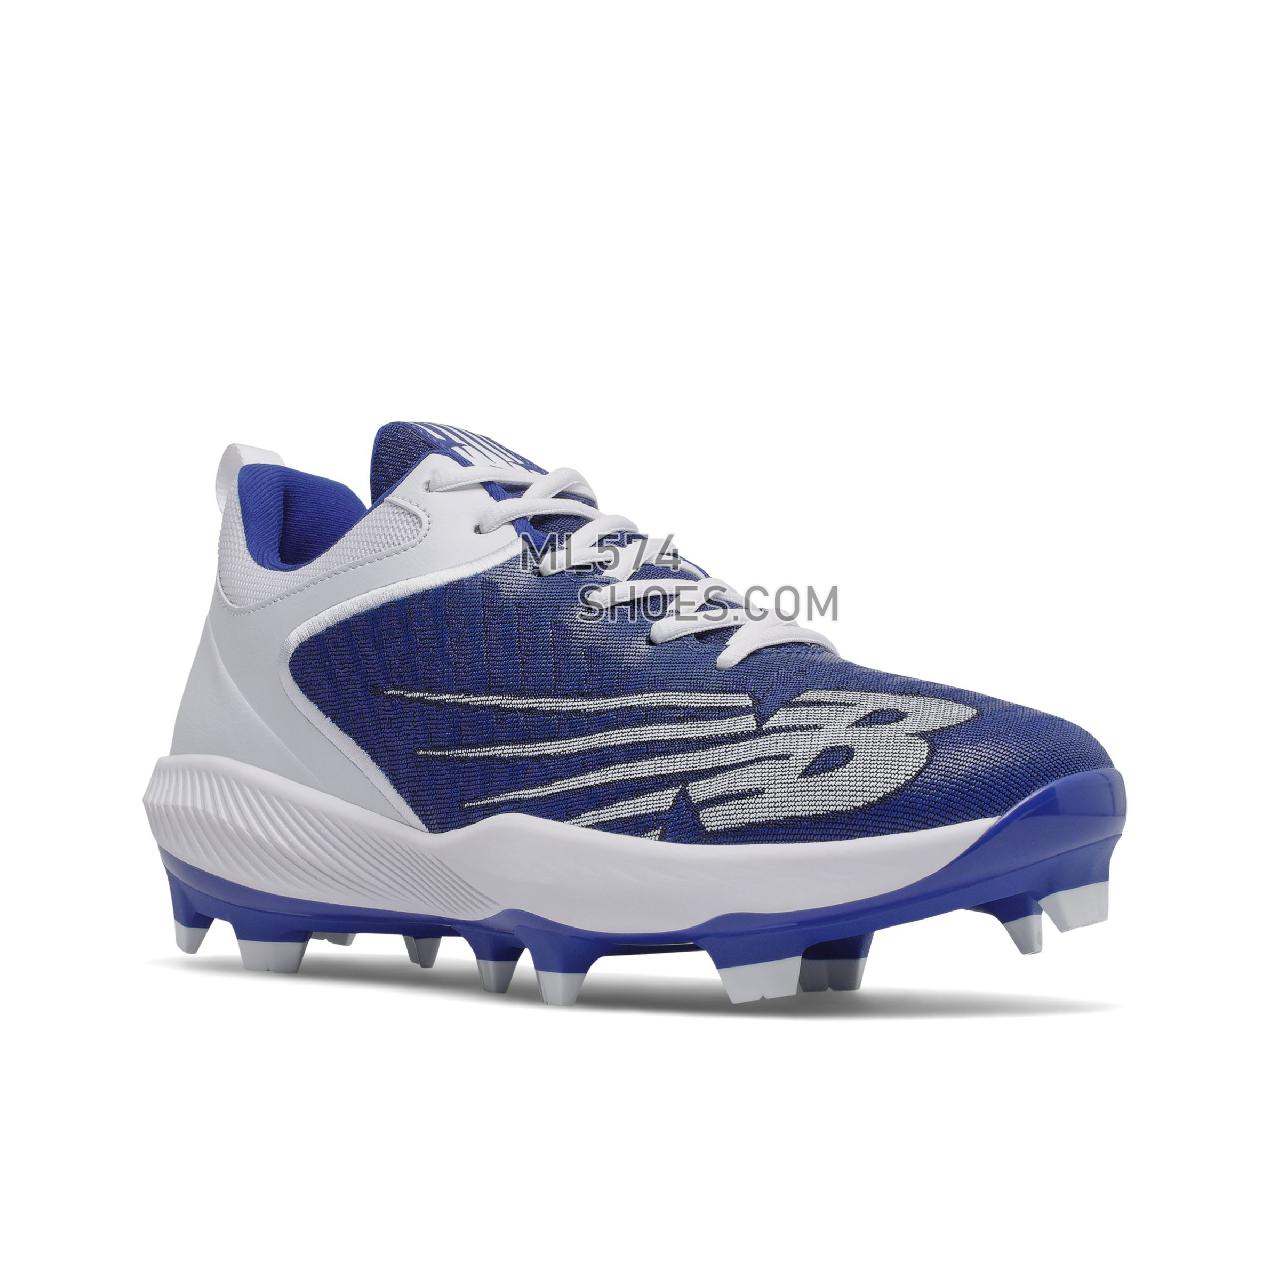 New Balance FuelCell 4040 v6 Molded - Men's Mid-Cut Baseball Cleats - Team Royal with White - PL4040B6